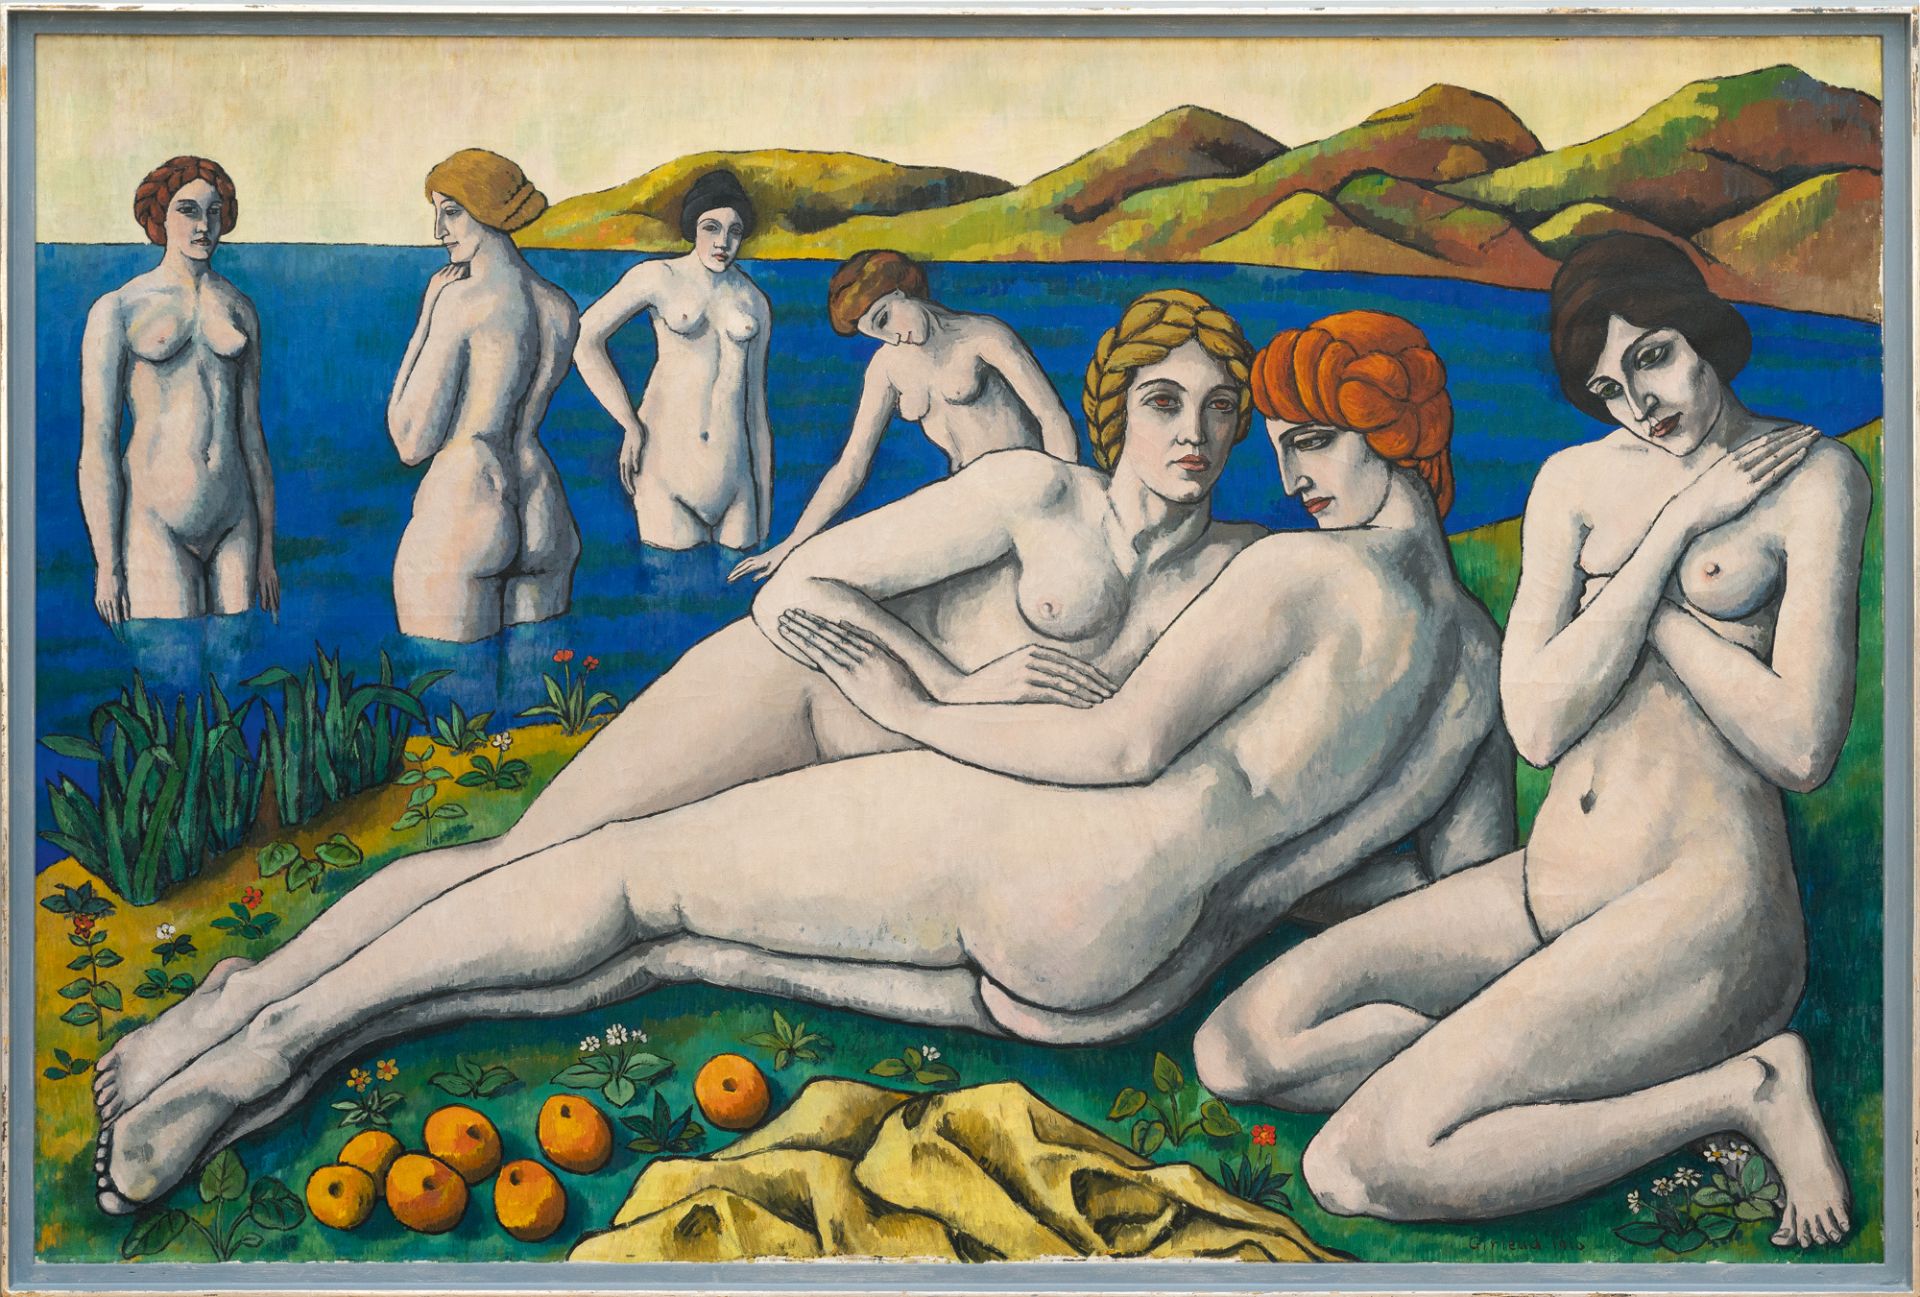 Pierre-Paul Girieud, Grand Lesbos (Baigneuses).Oil on canvas. 1910. Ca. 150 x 225 cm. Signed and - Image 3 of 5